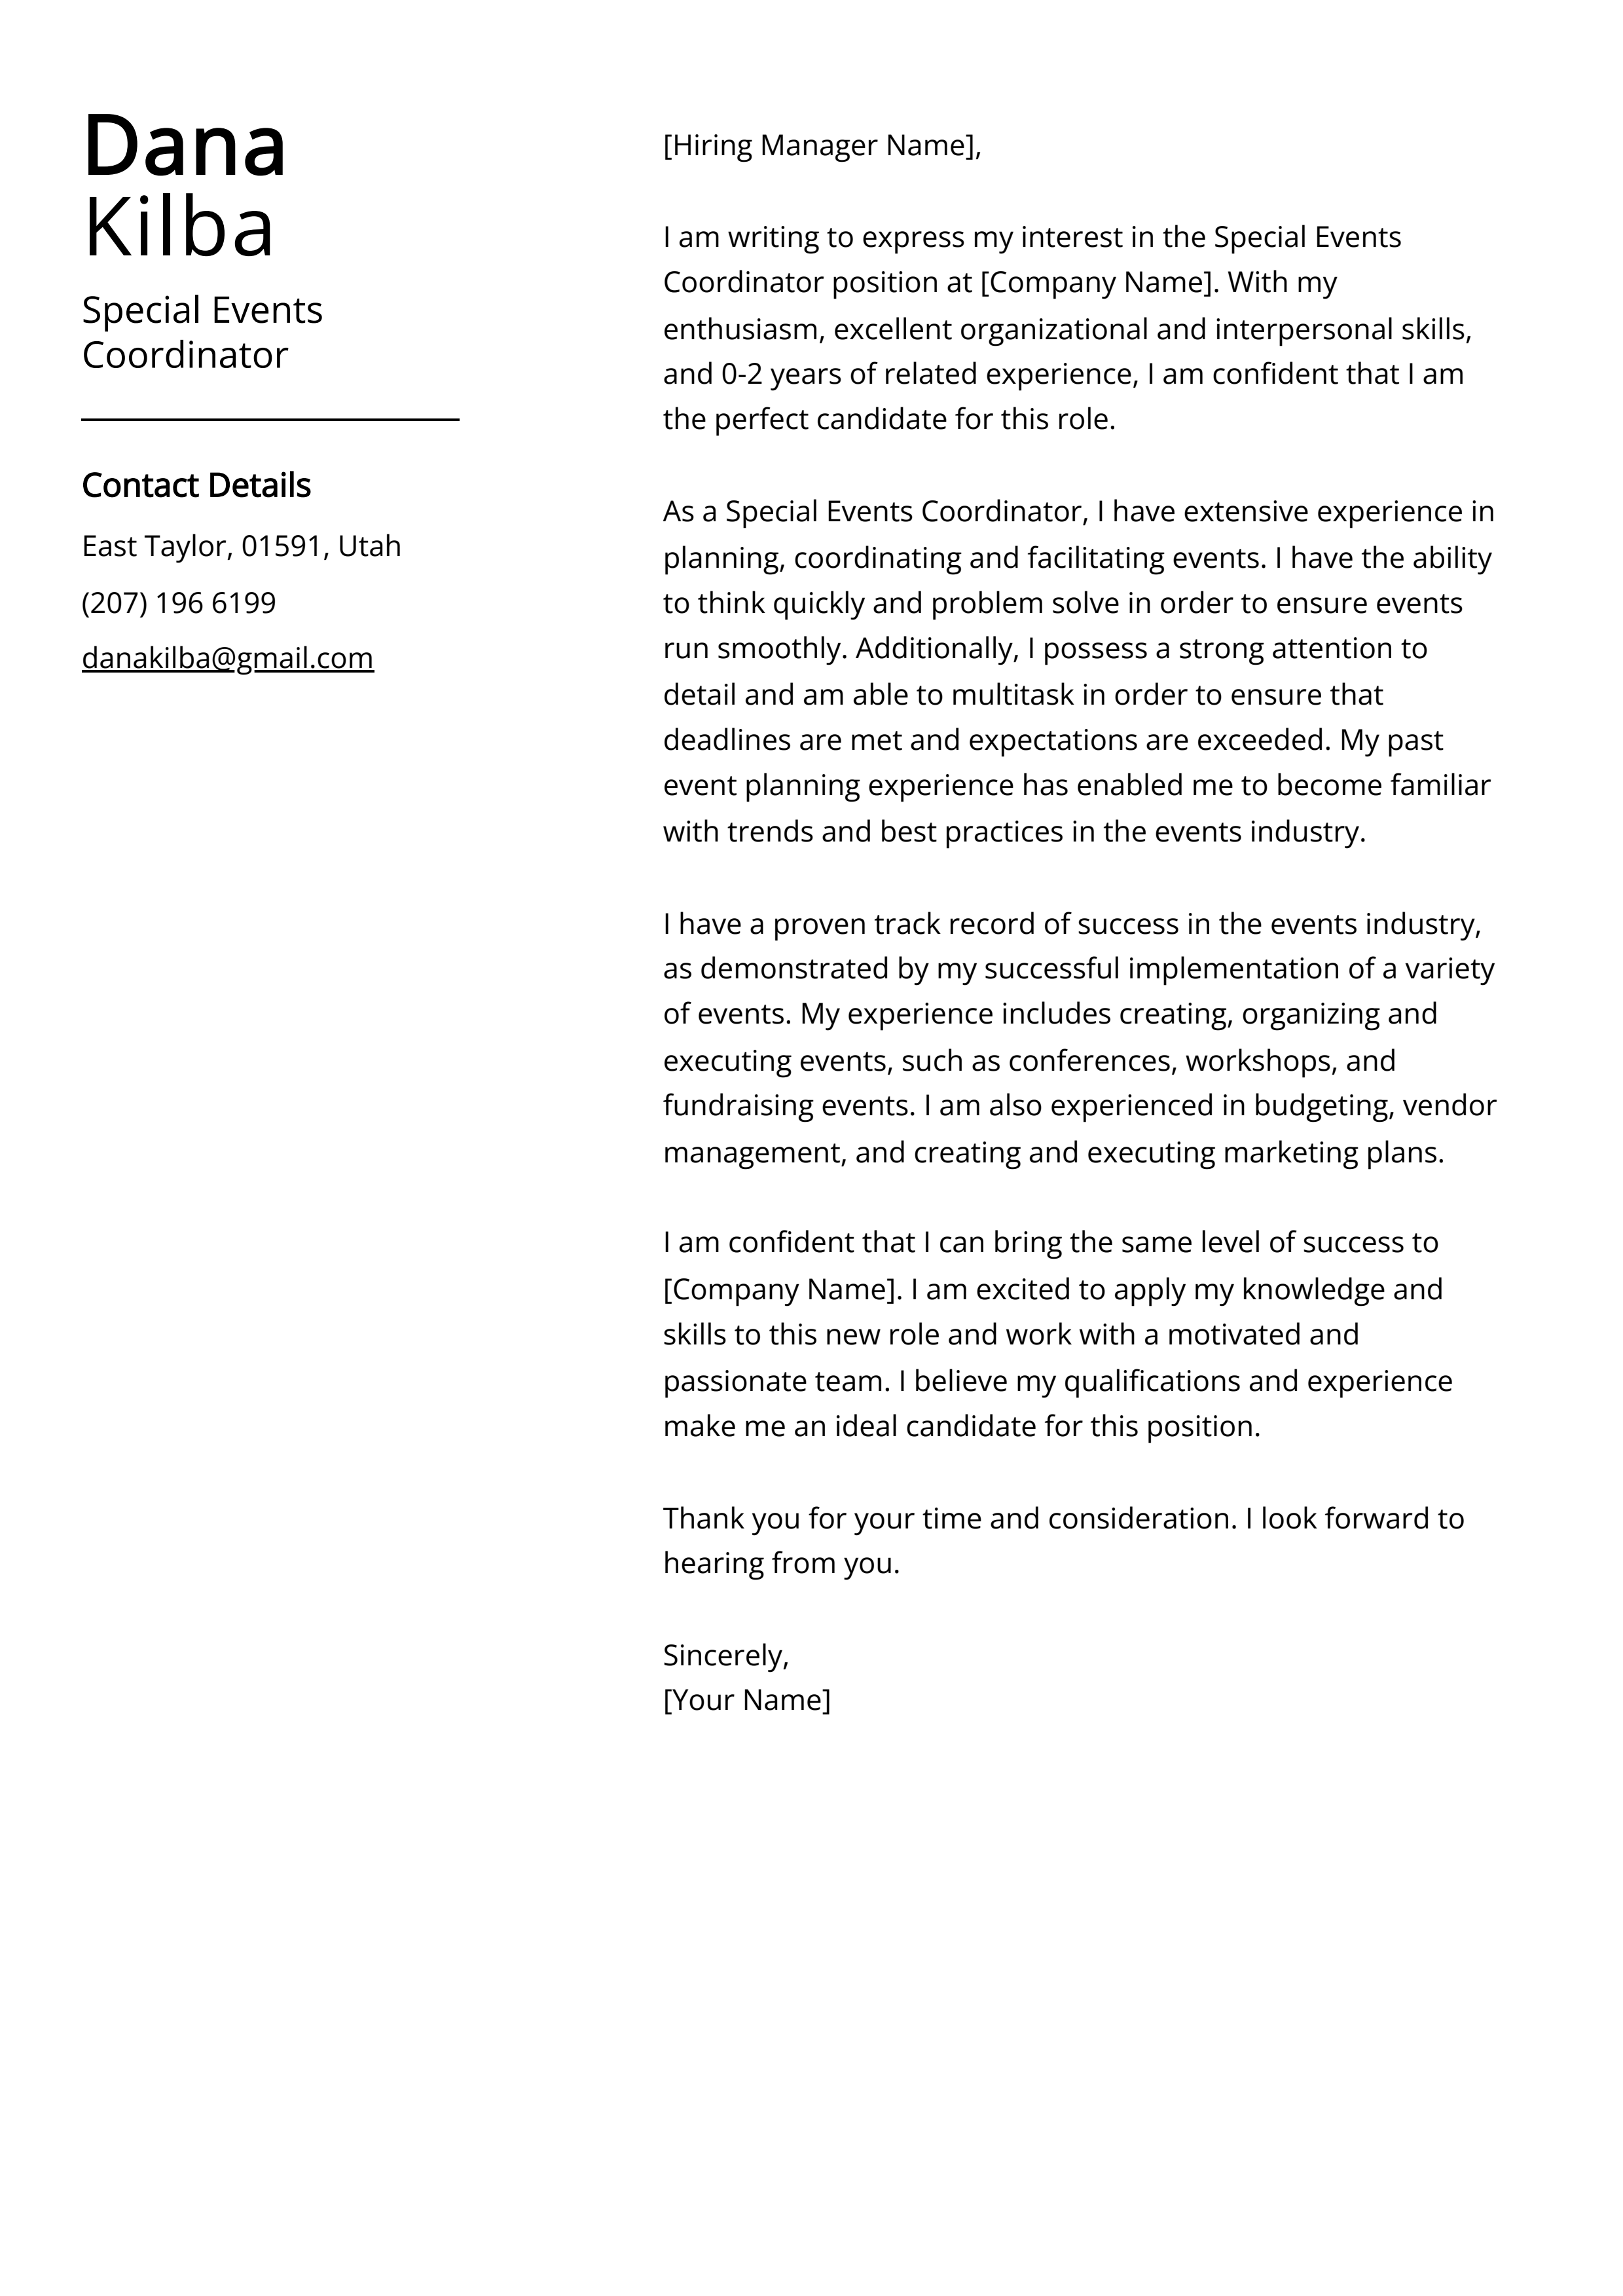 Special Events Coordinator Cover Letter Example